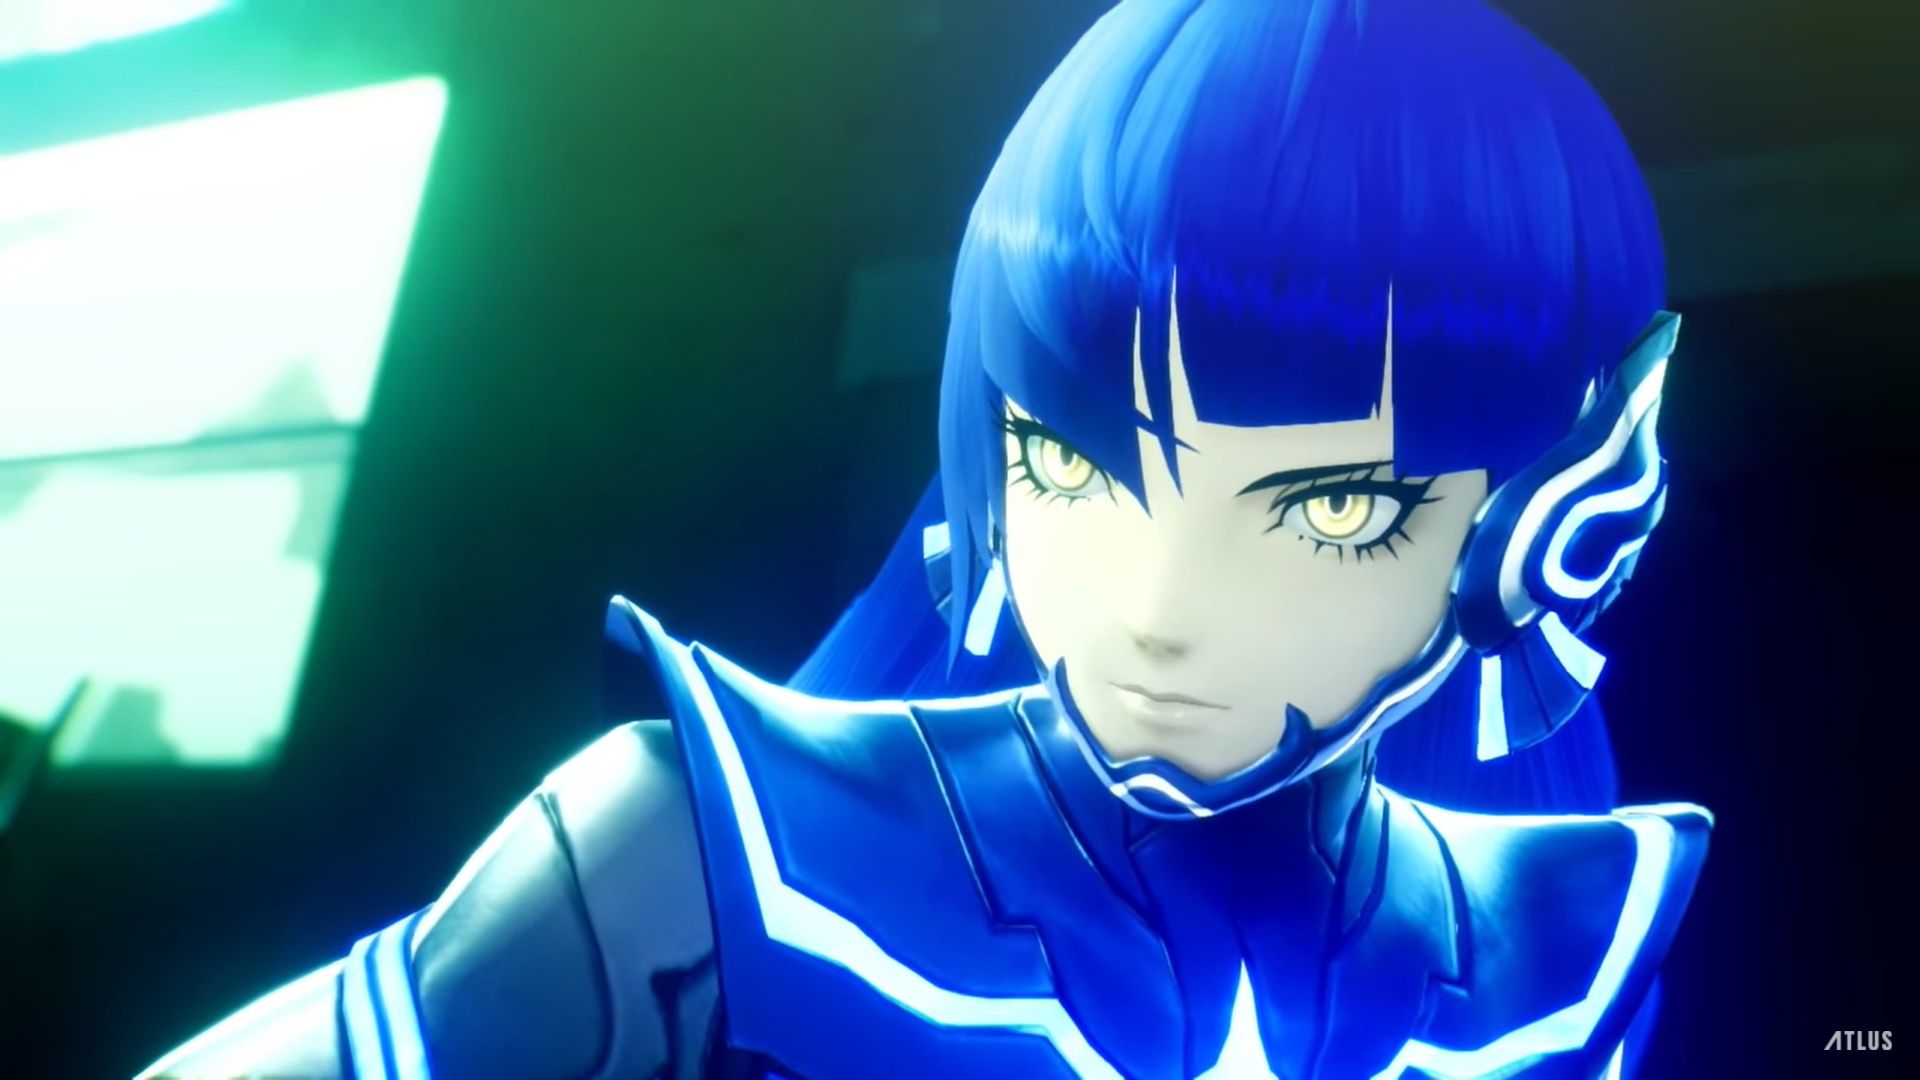 Shin Megami Tensei 5 Character Trailer Introduces Bethel and More